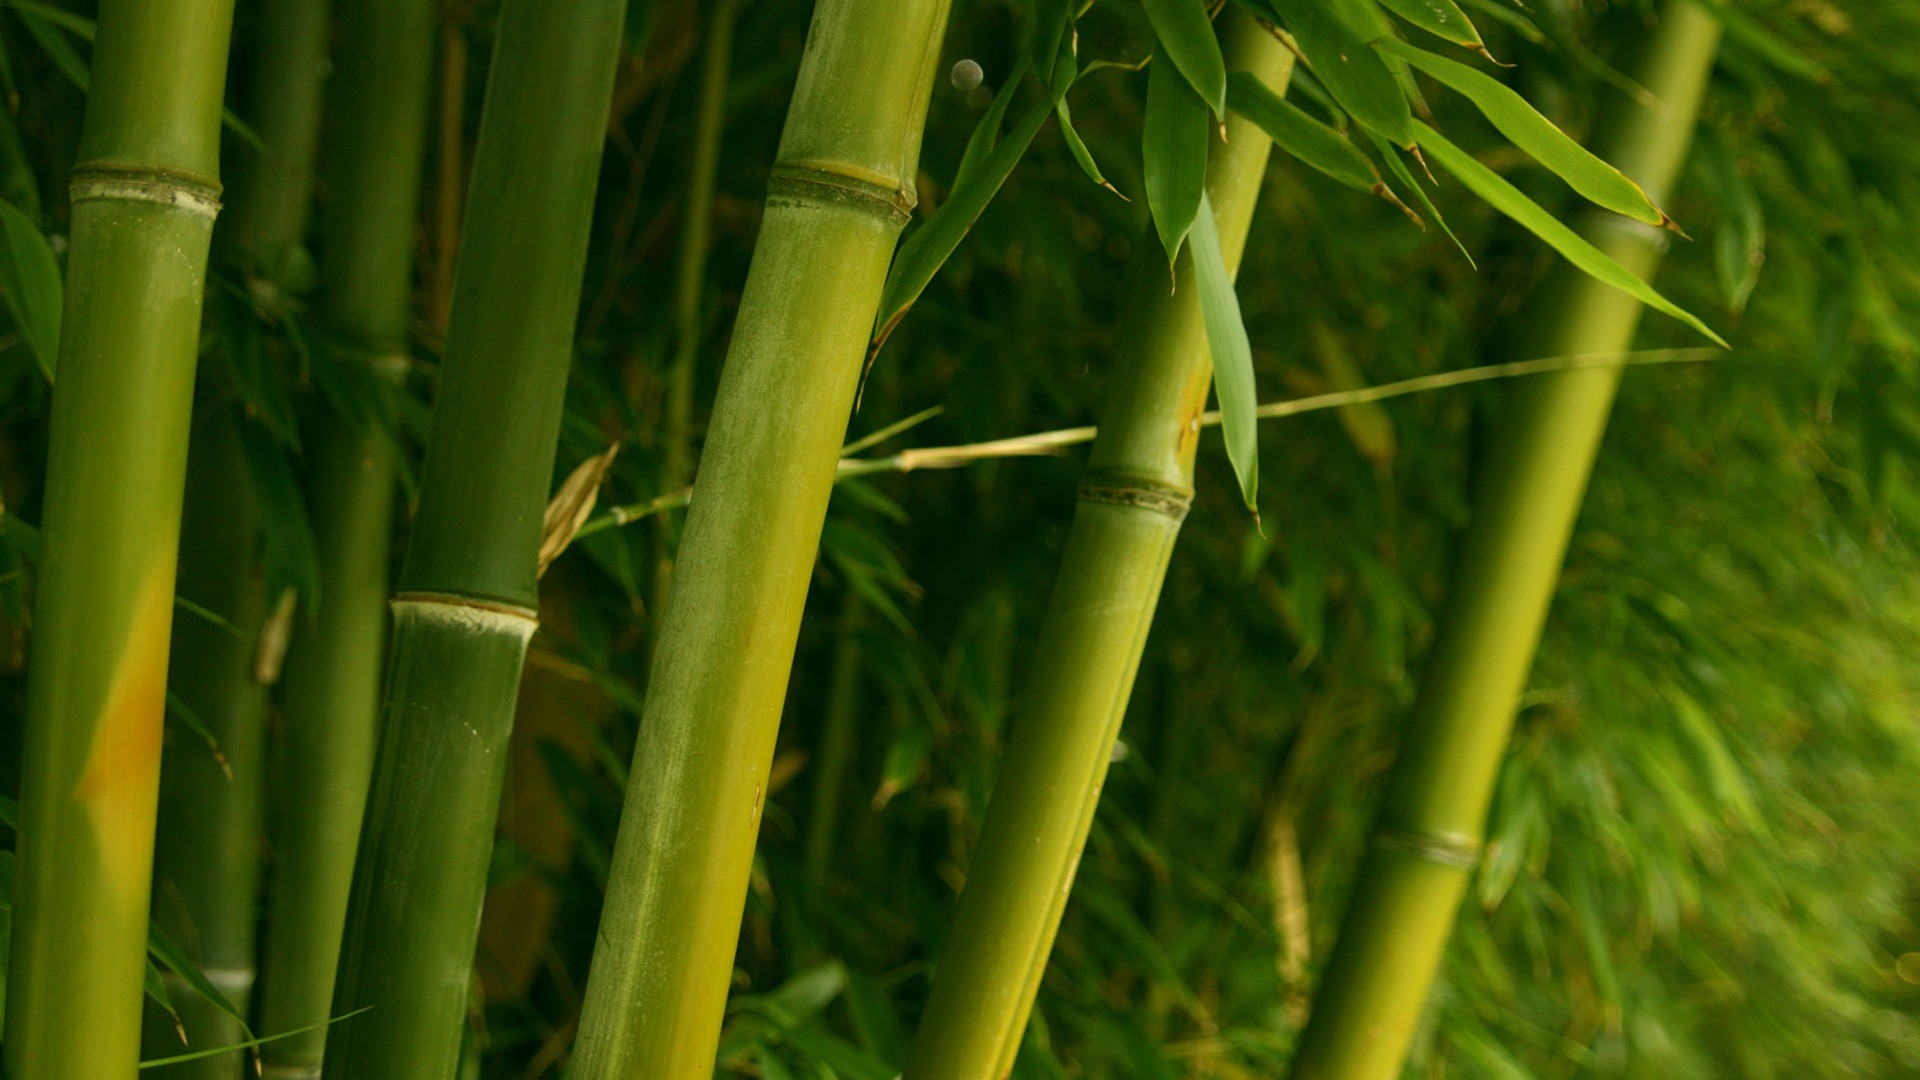 1920x1080 Bamboo Wallpaper Plants Nature Wallpapers